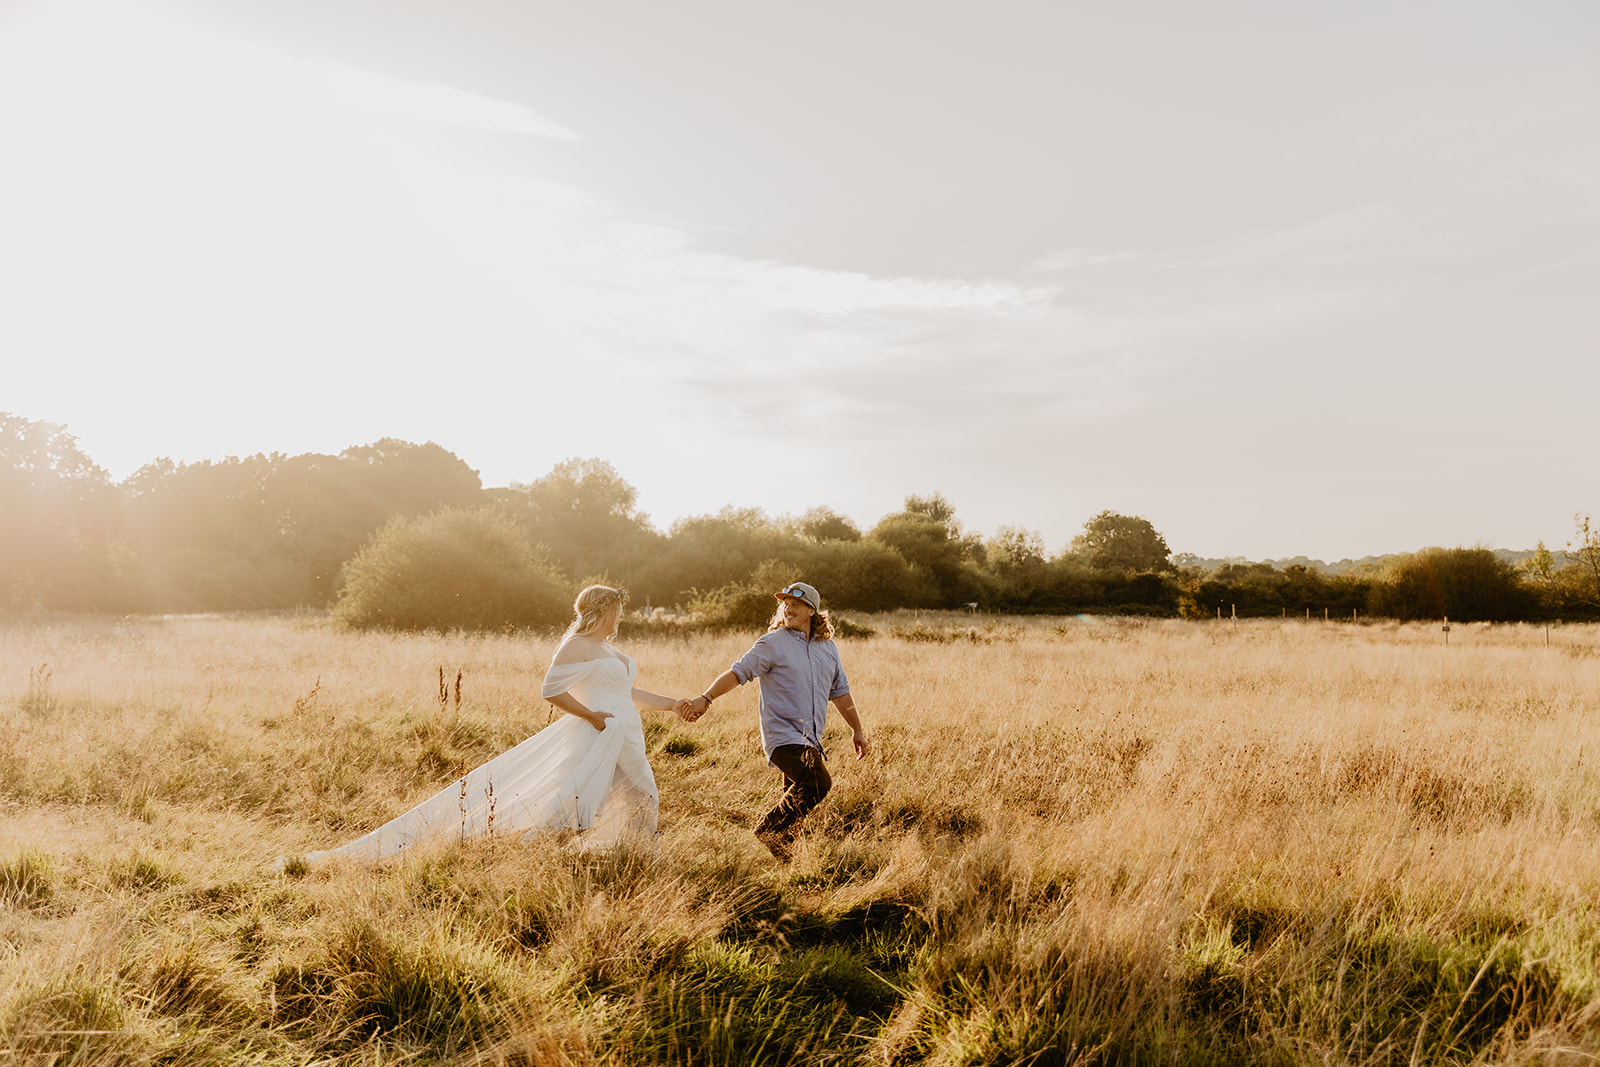 Bride and groom at sunset at a wedding at Mac's Farm in Sussex. By OliveJoy Photography.